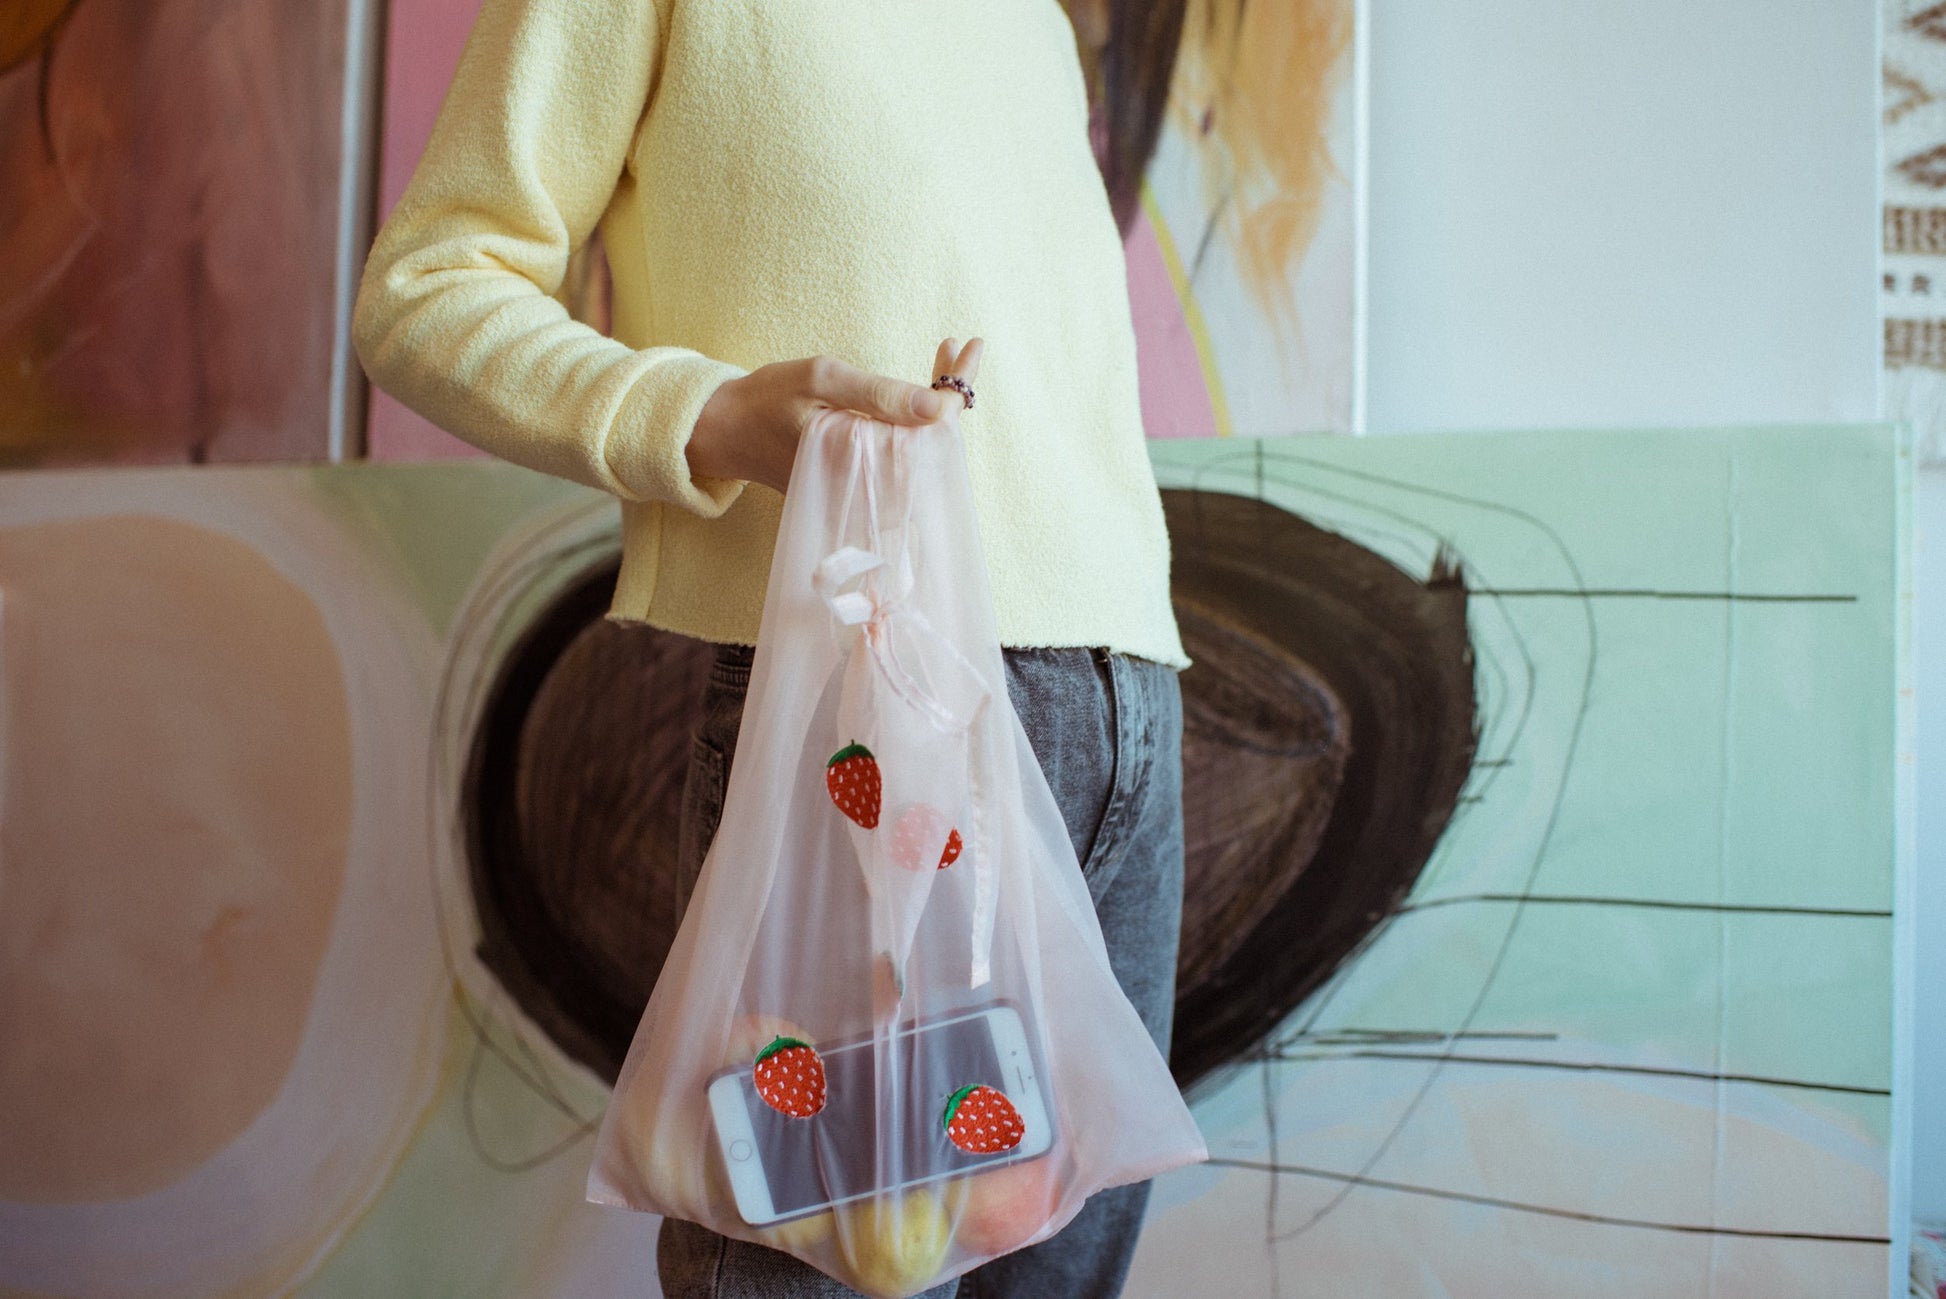 Luxurious Organza Strawberries Embroidered Tote - Closed Caption | Shop Vintage + Handmade. Always Sustainable. Never Wasteful.